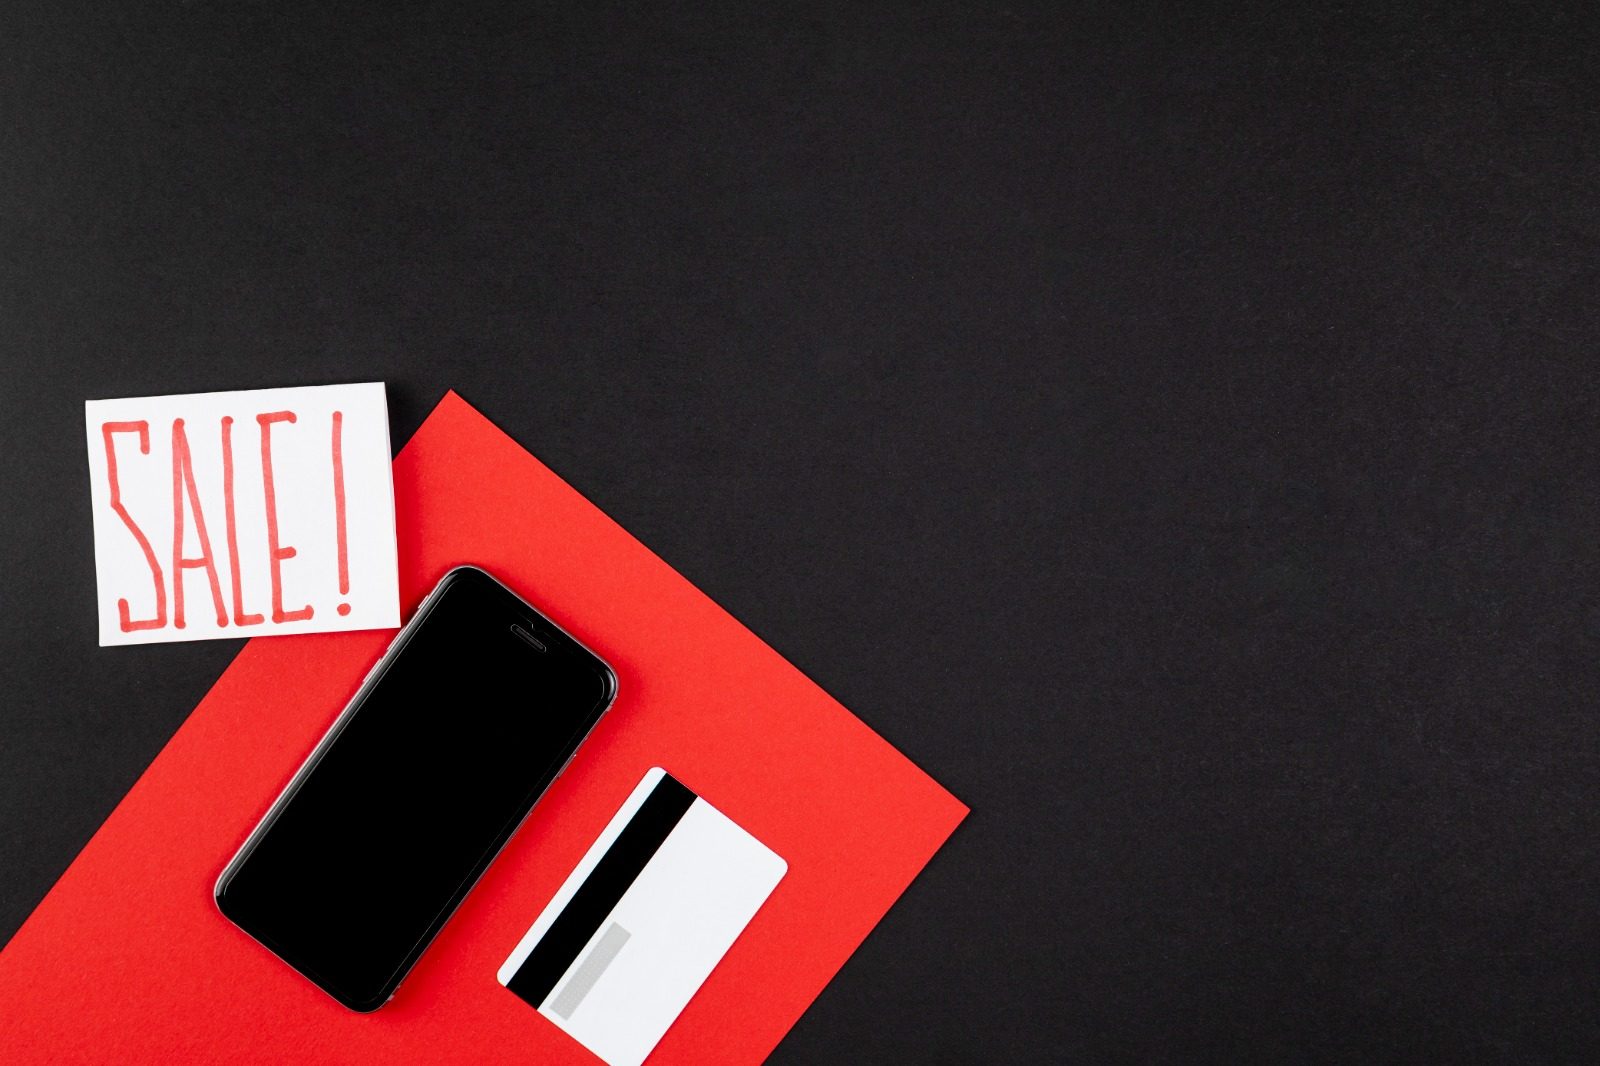 Phone on a red and black background